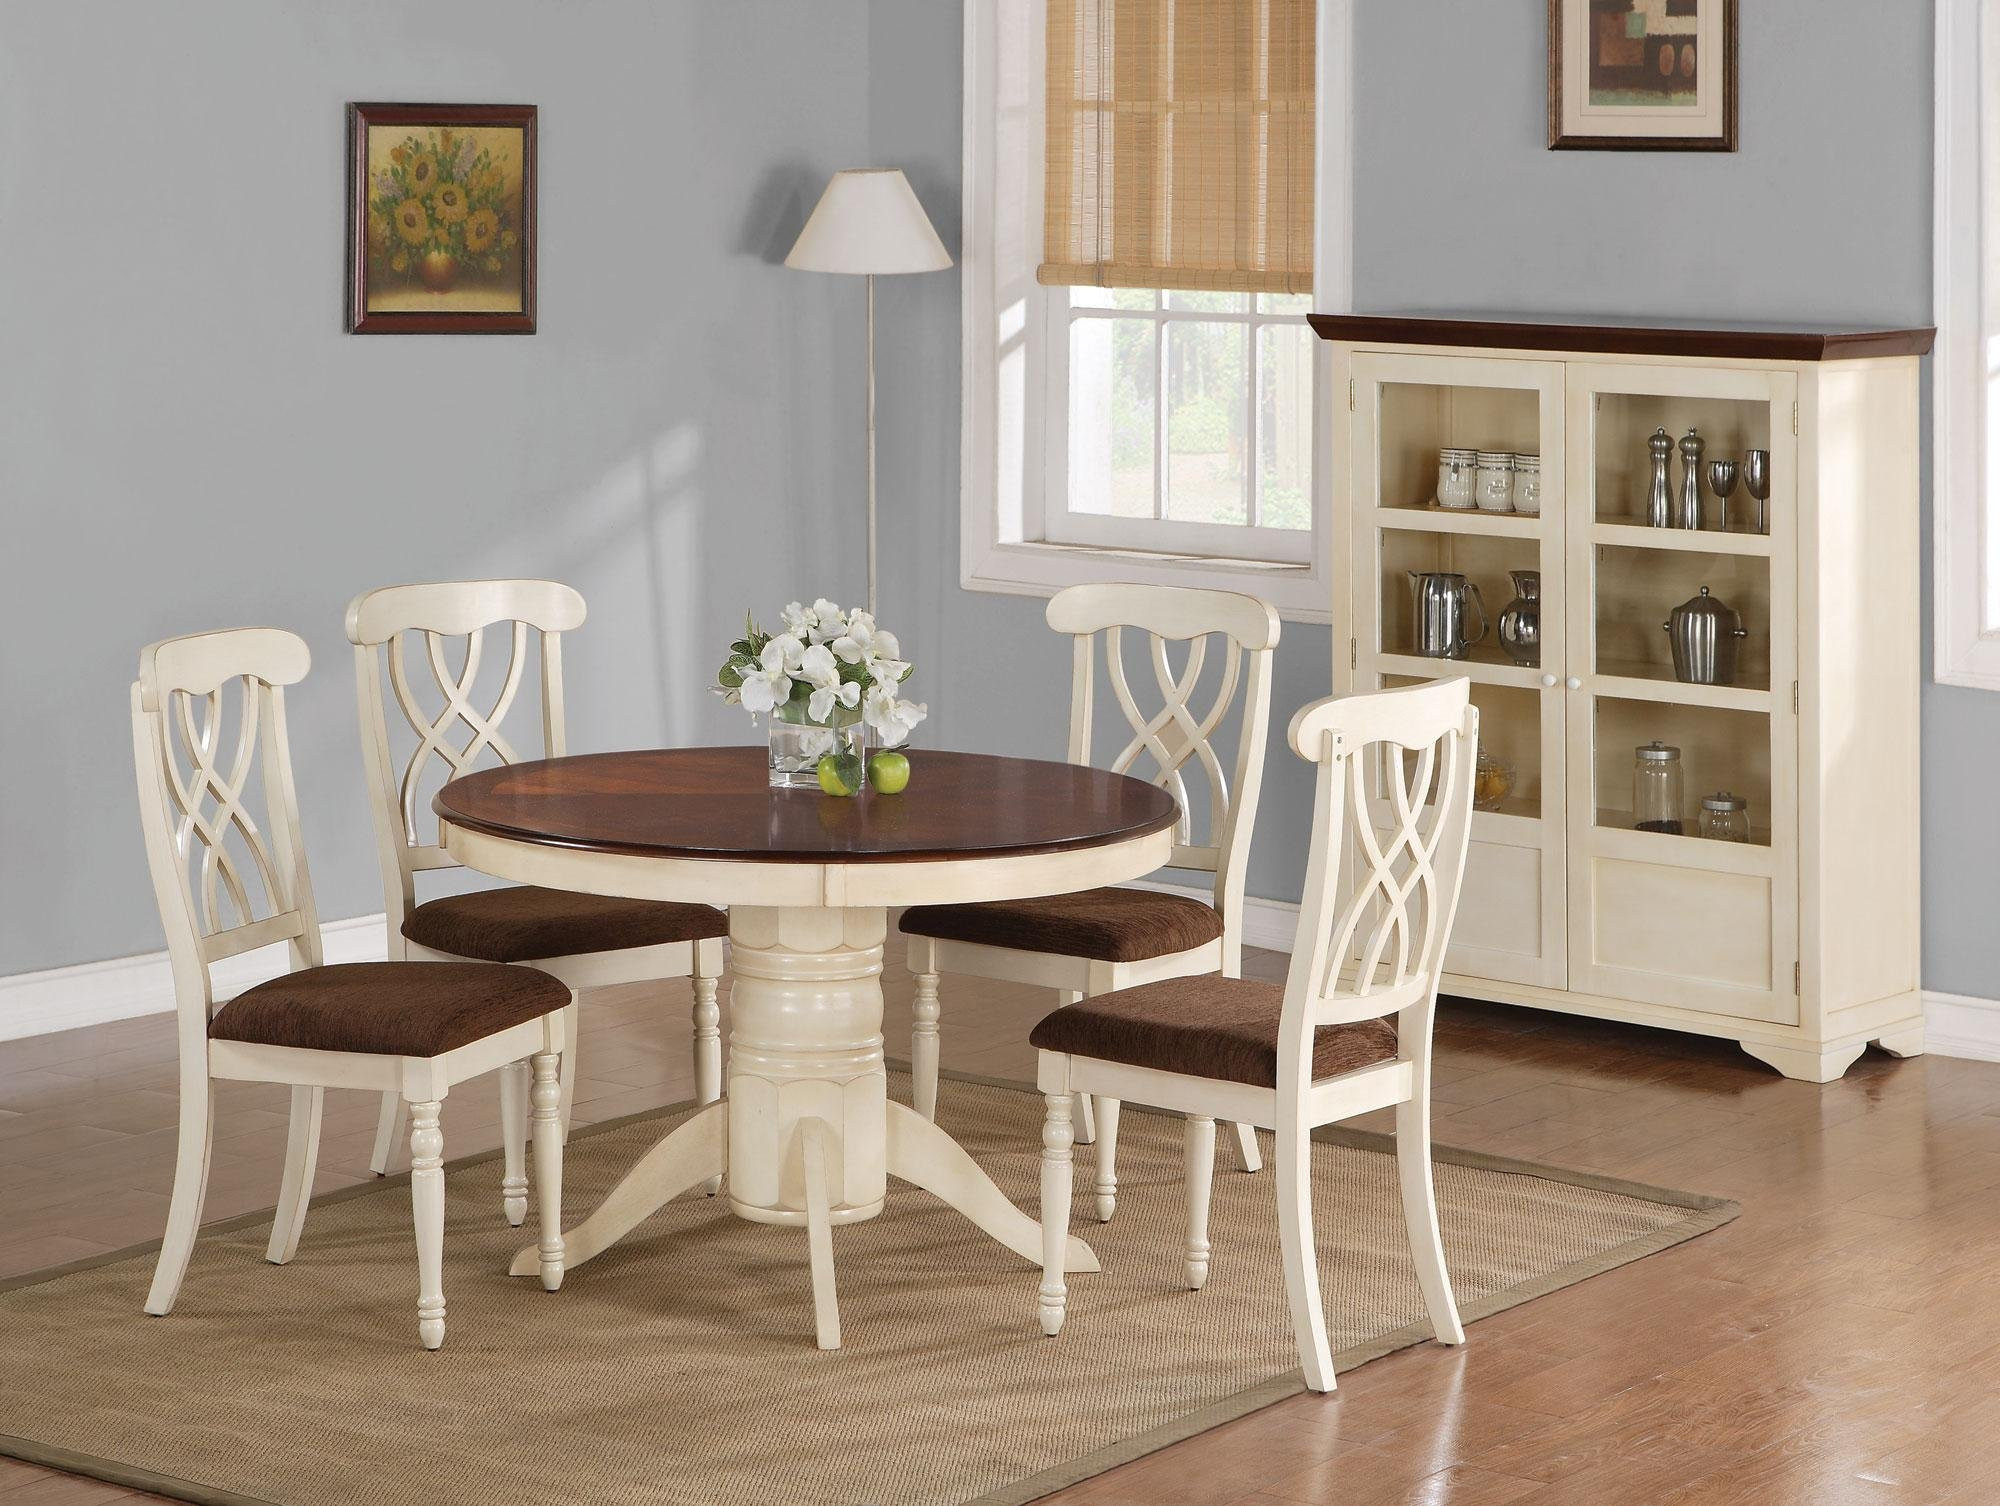 Small Wood Kitchen Table
 Beautiful White Round Kitchen Table and Chairs